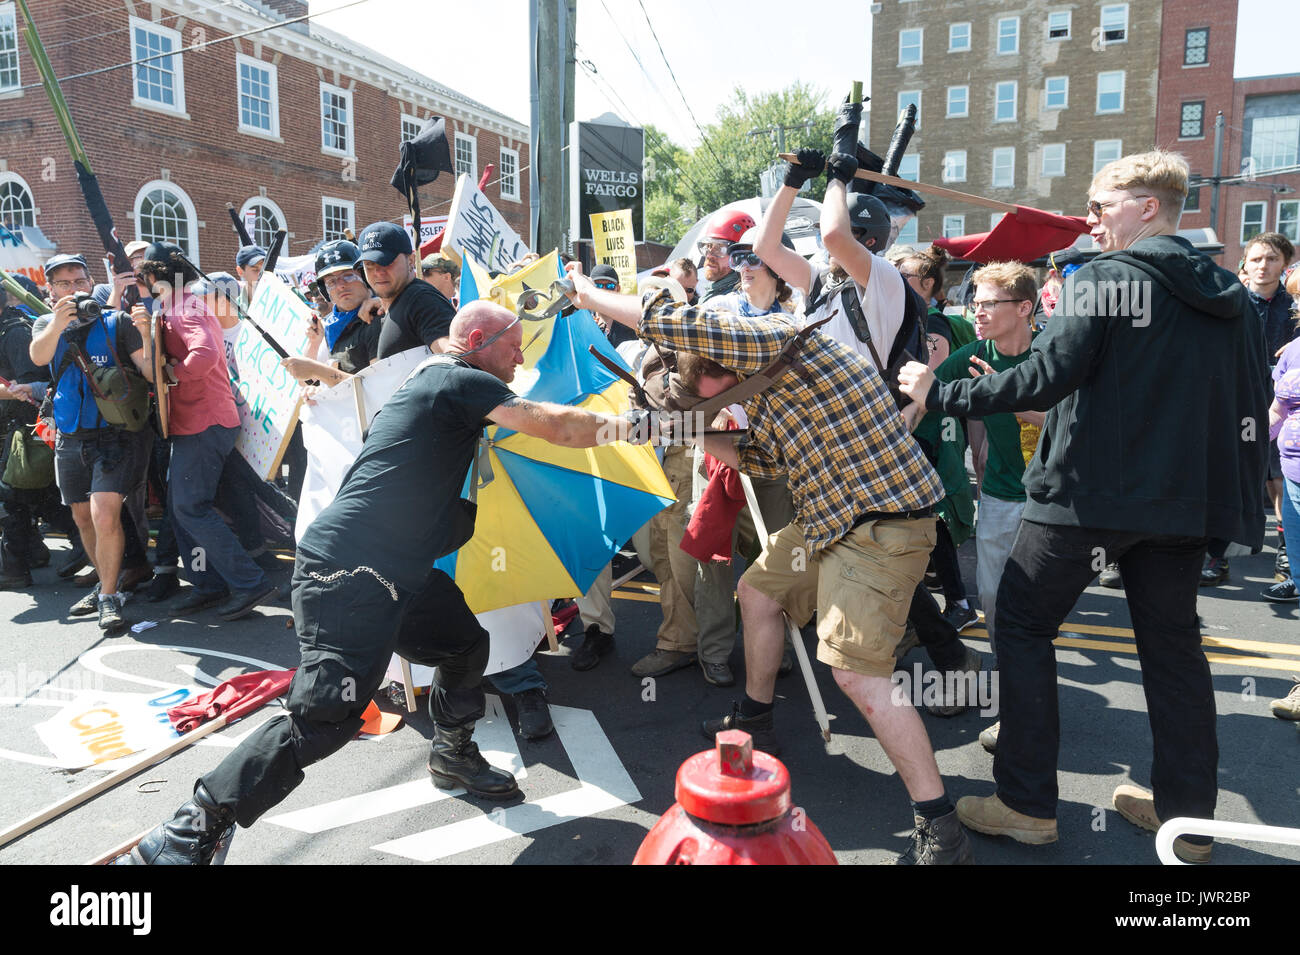 Charlottesville, United States. 12th Aug, 2017. Neo-Nazis, white supremacists and other alt-right factions scuffled with counter-demonstrators near Emancipation Park (Formerly 'Lee Park') in downtown Charlottesville, Virginia. After fighting between factions escalated, Virginia State Police ordered the evacuation by all parties and cancellation of the 'Unite The Right' rally scheduled to take place in the park. Credit: Albin Lohr-Jones/Pacific Press/Alamy Live News Stock Photo